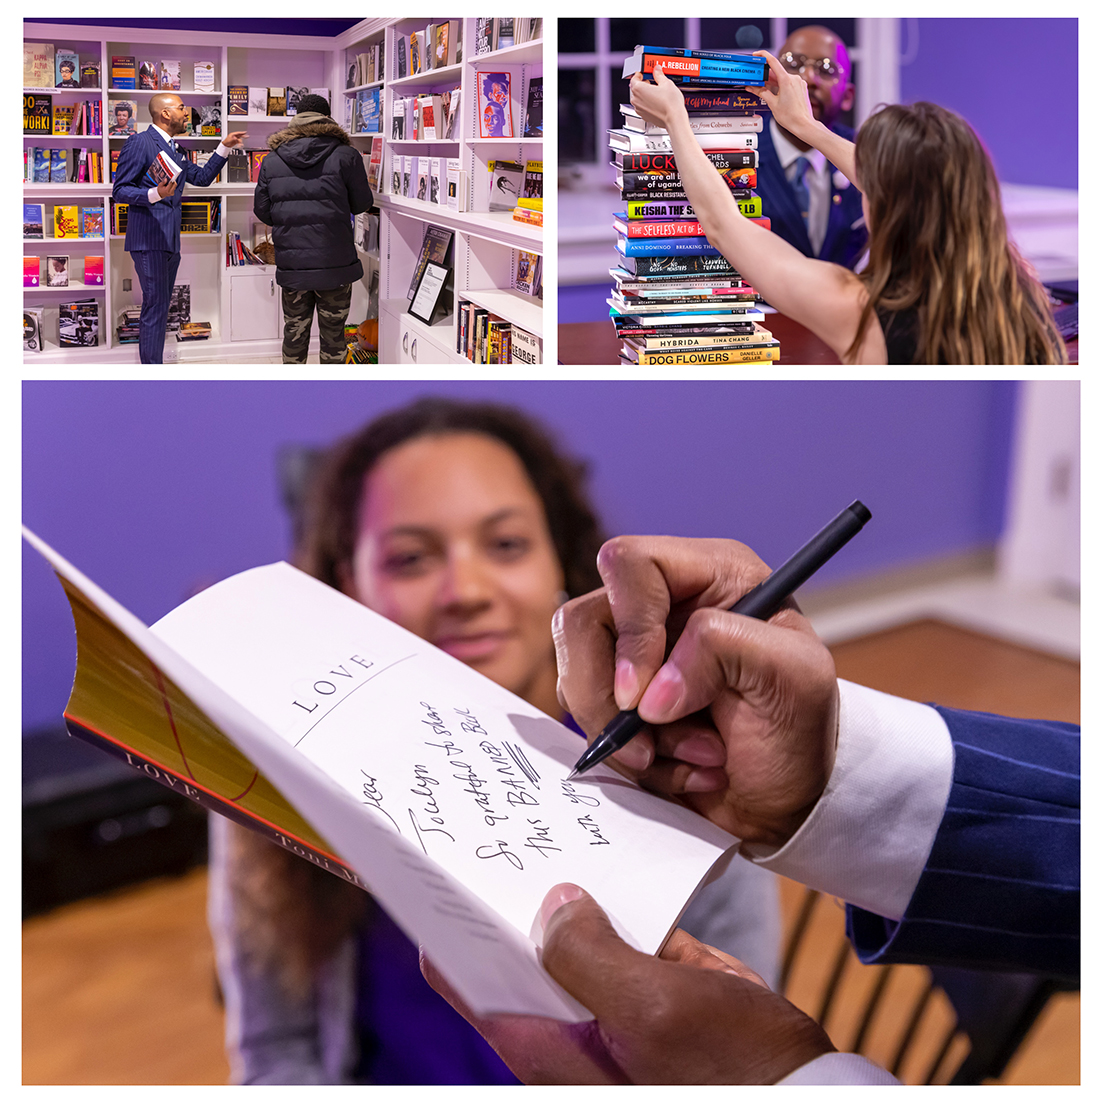 A collage of people in a book store and a person signing a book